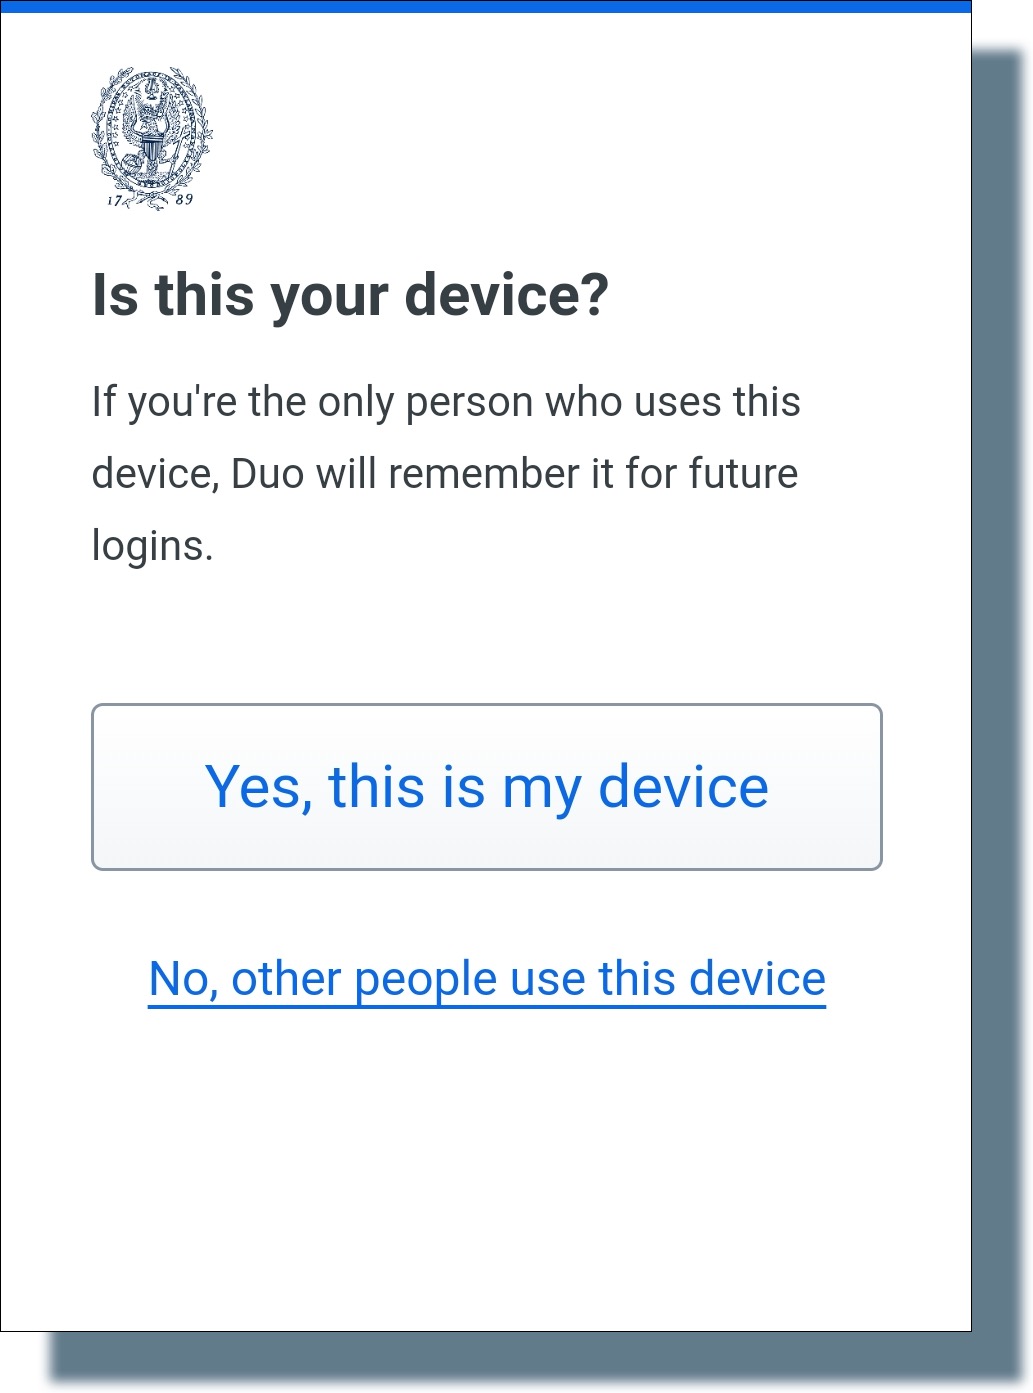 Duo image with options to choose whether this device is yours and if it is shared.